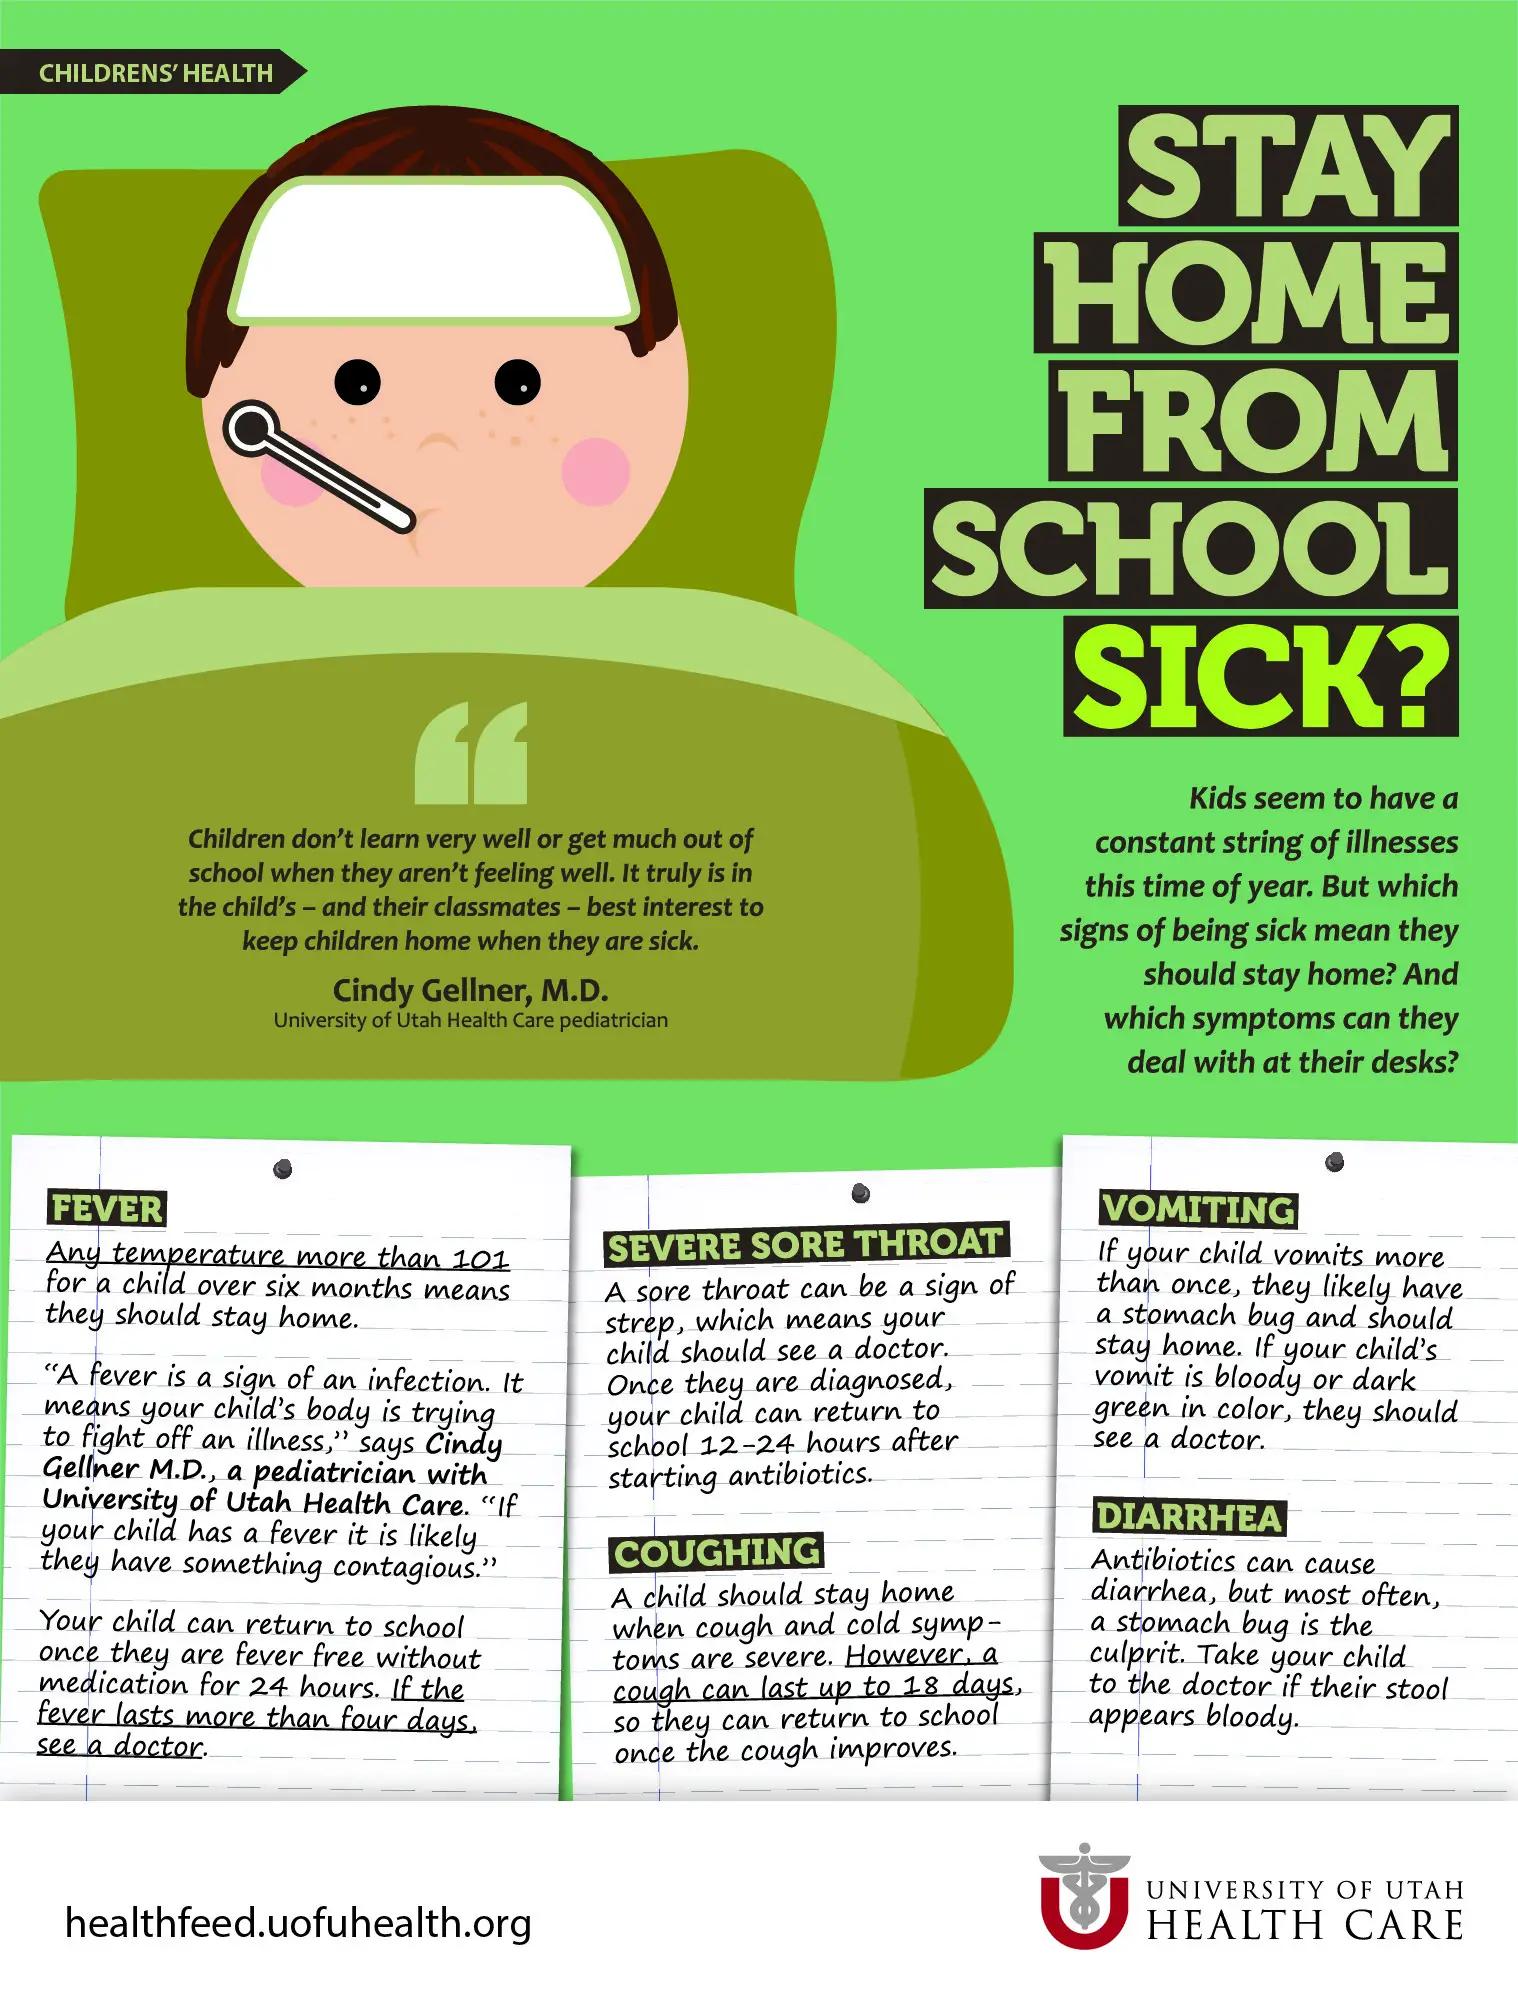 When Sick Kids Should Stay Home